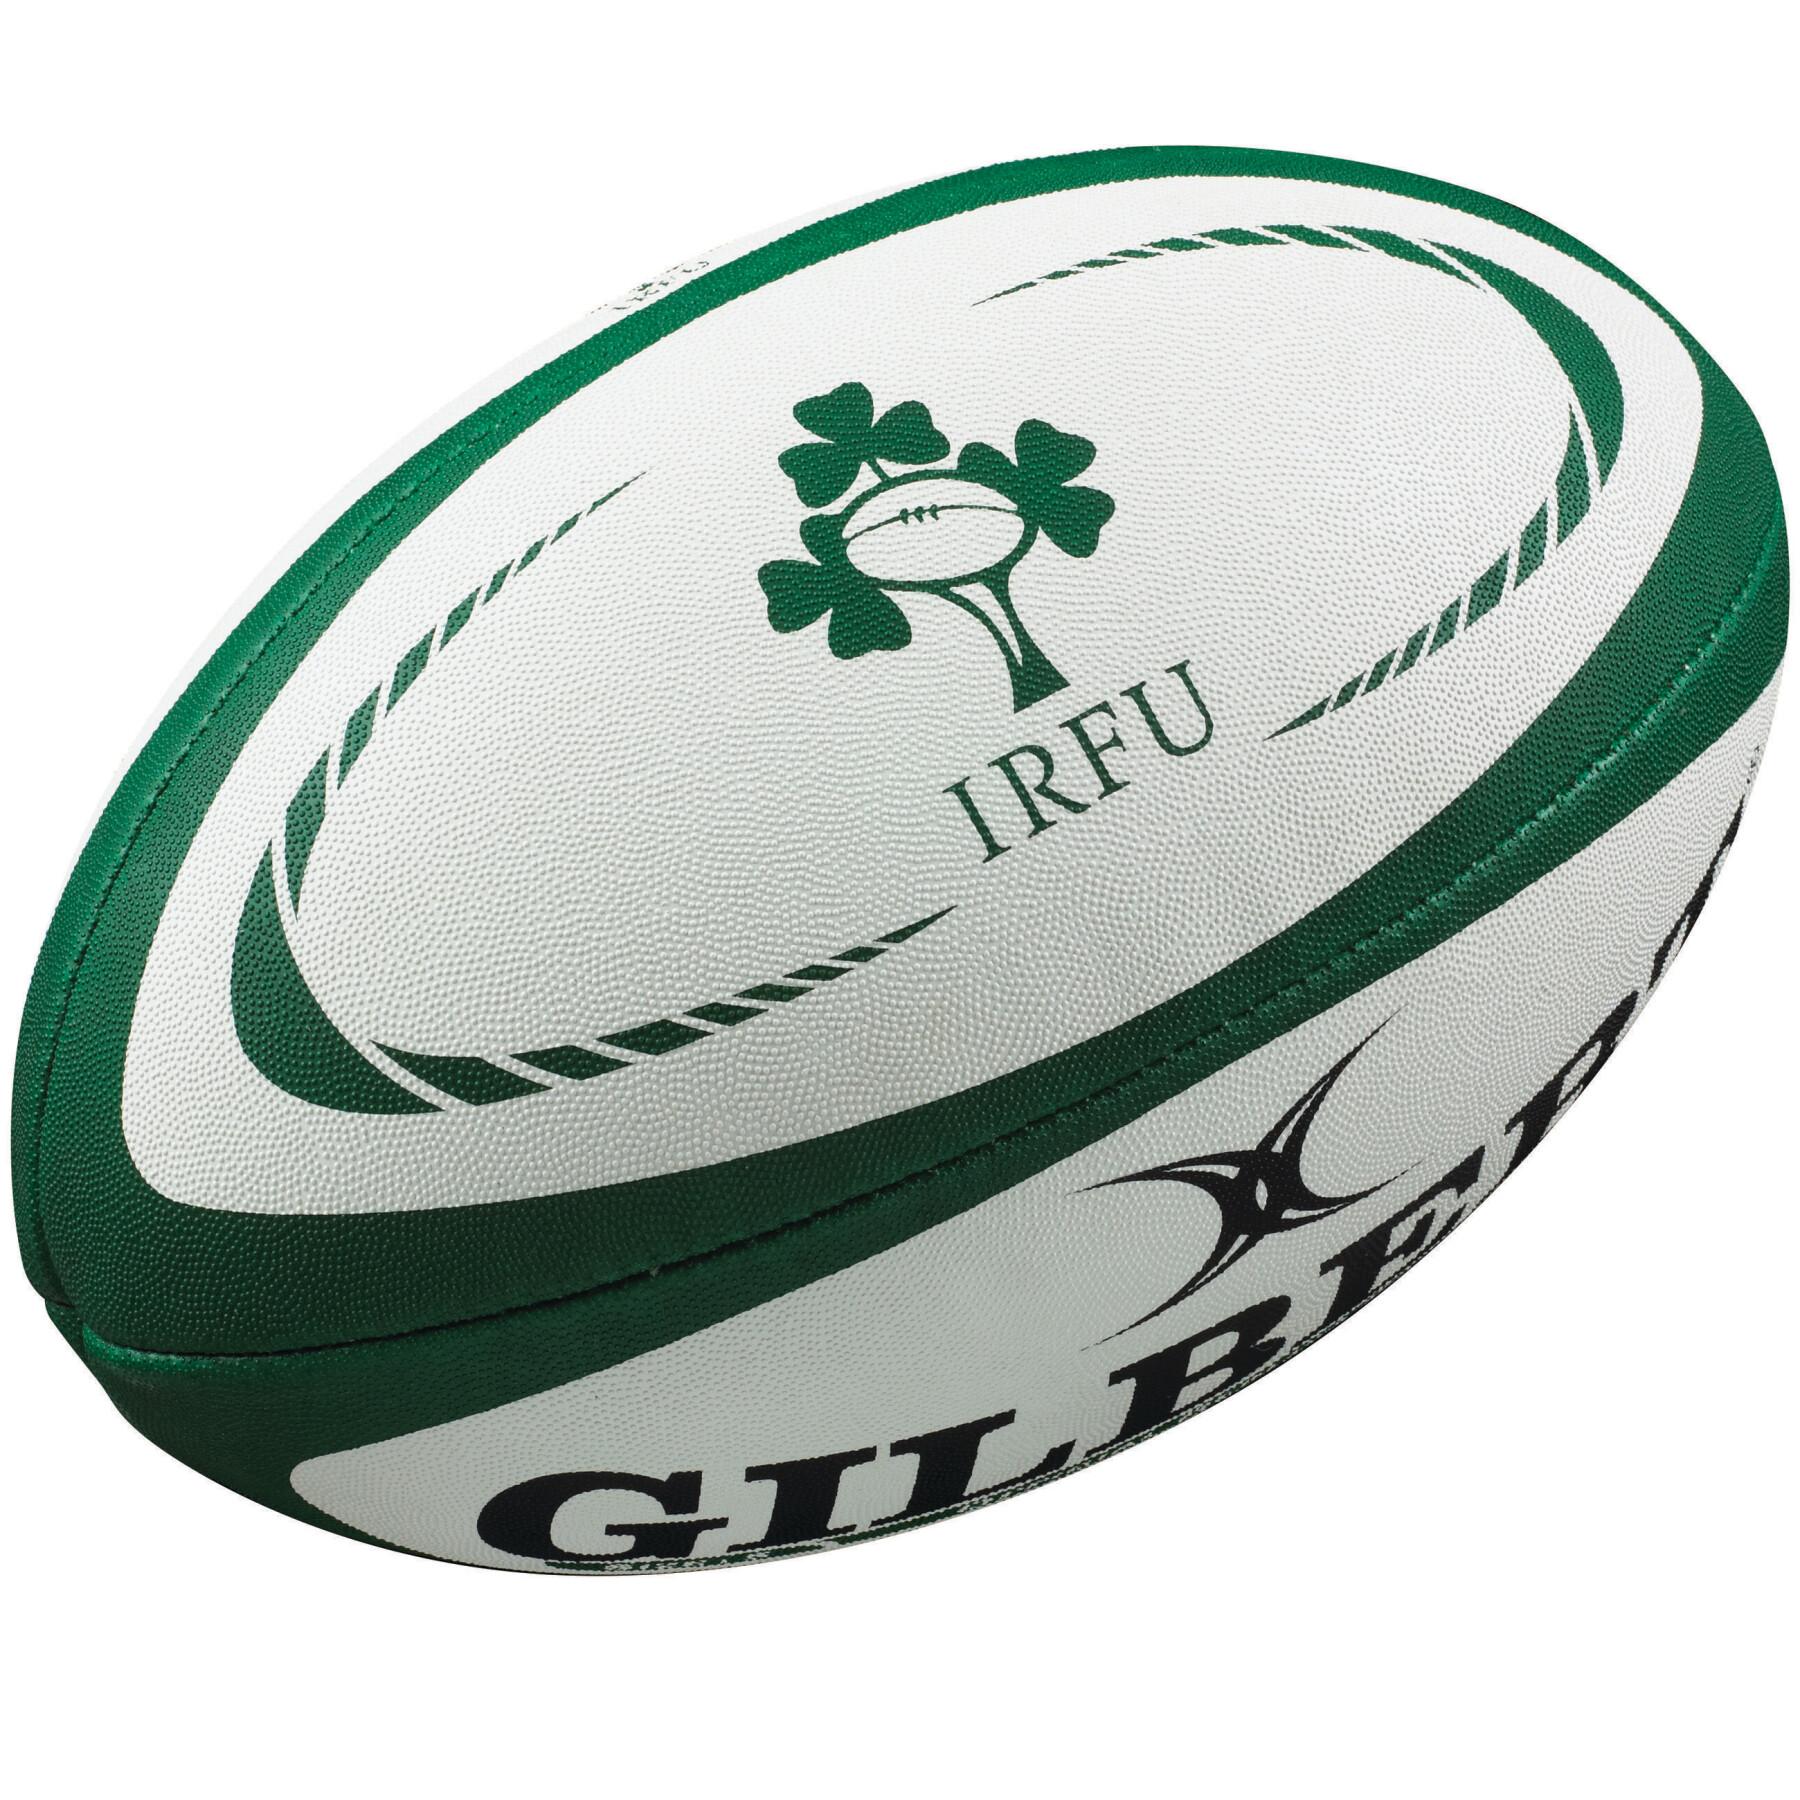 Pack of 25 Rugby balls Ireland